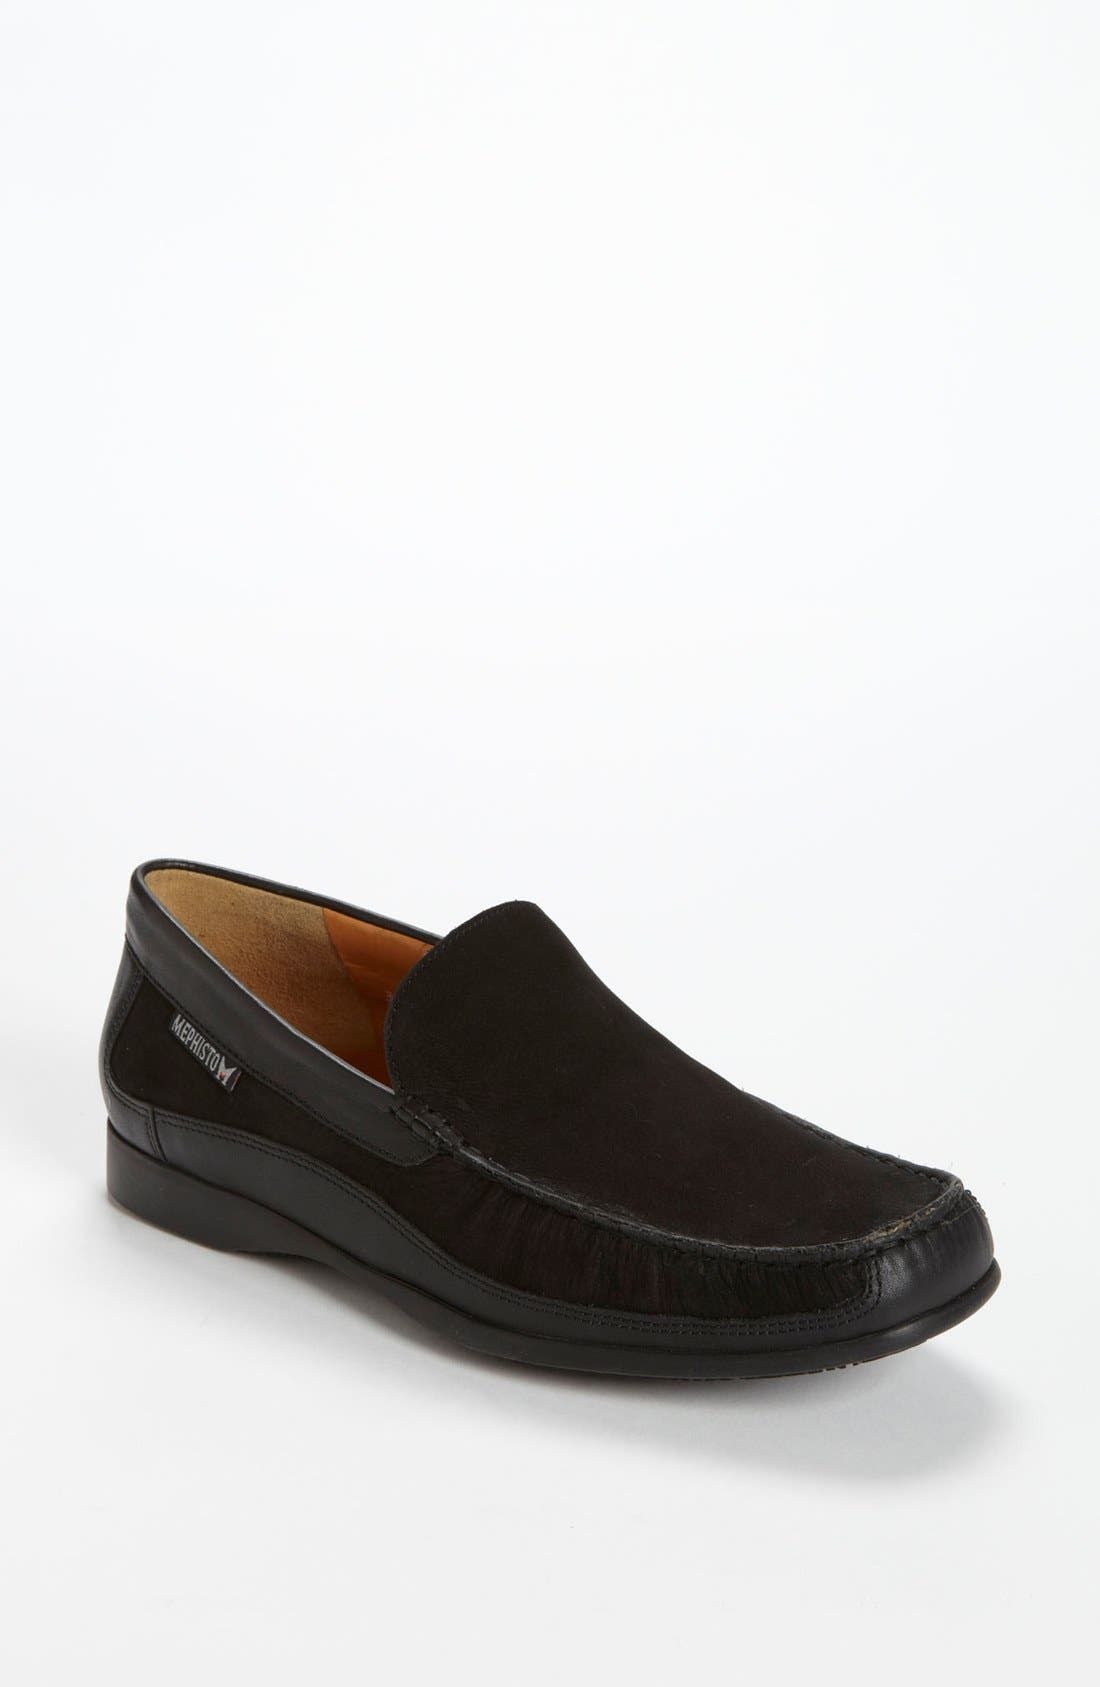 nordstrom mephisto shoes